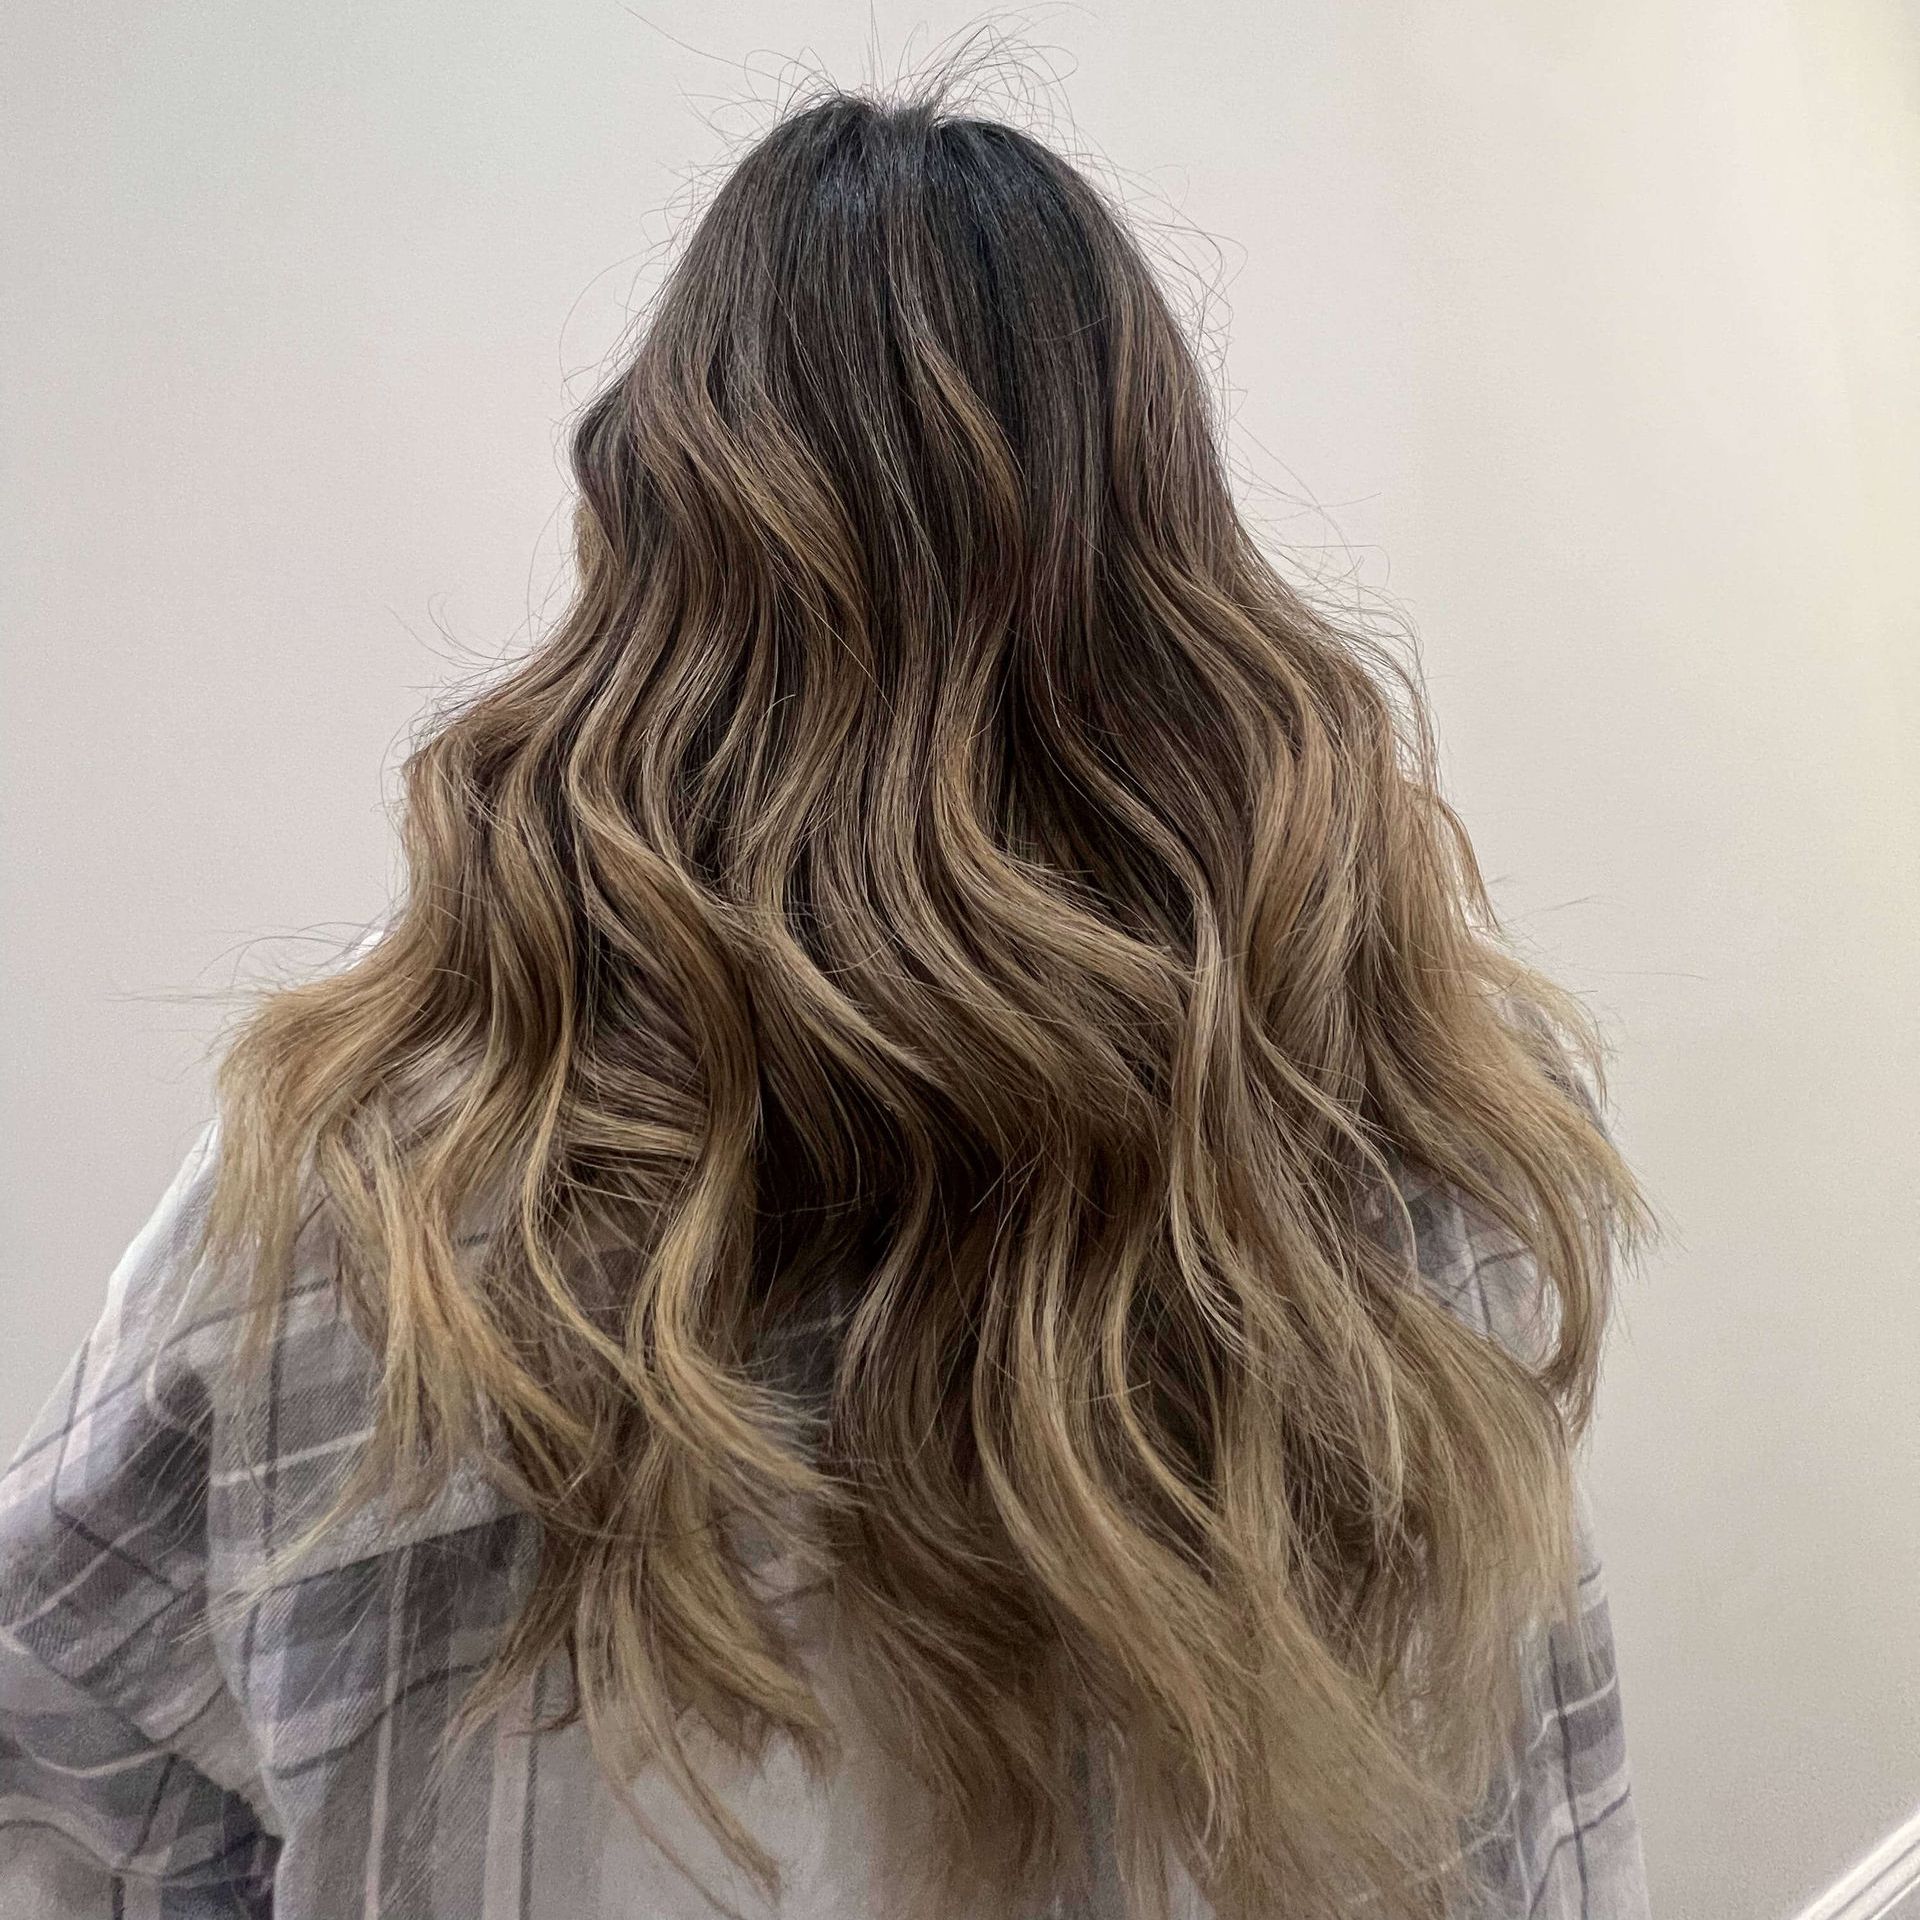 Woman with recently cut ombre, wavy hair